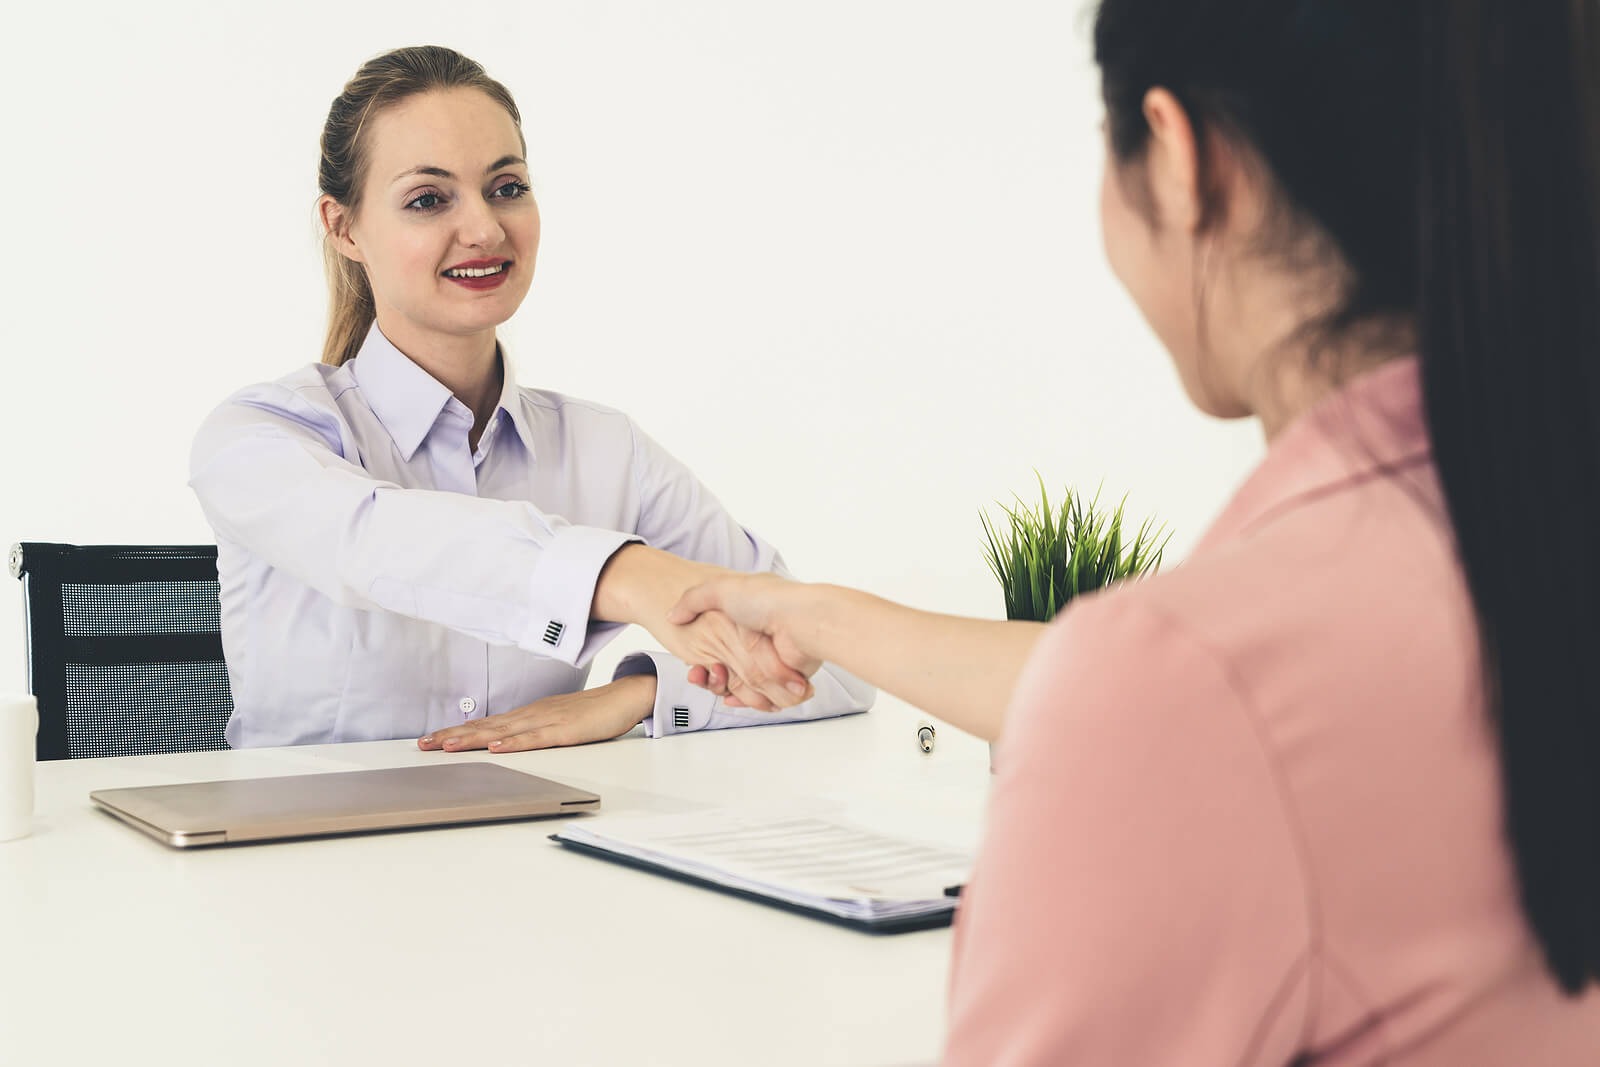 A successful graduate interview with handshake between two women